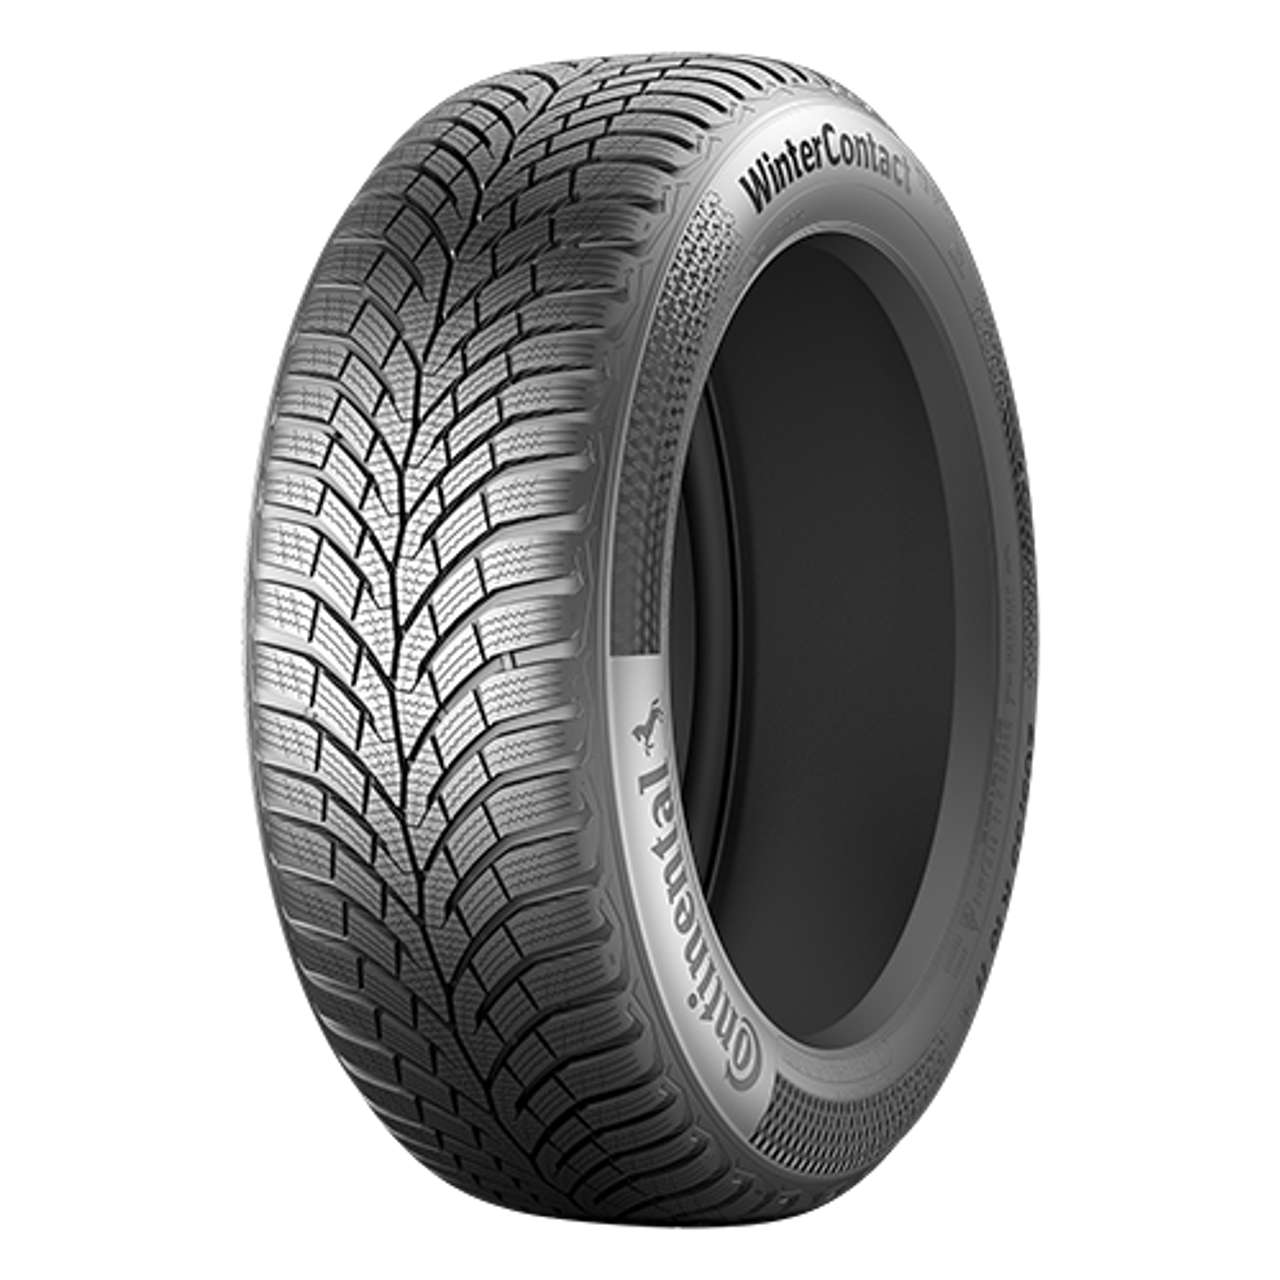 CONTINENTAL WINTERCONTACT TS 870 (EVc) 205/60R15 91H BSW